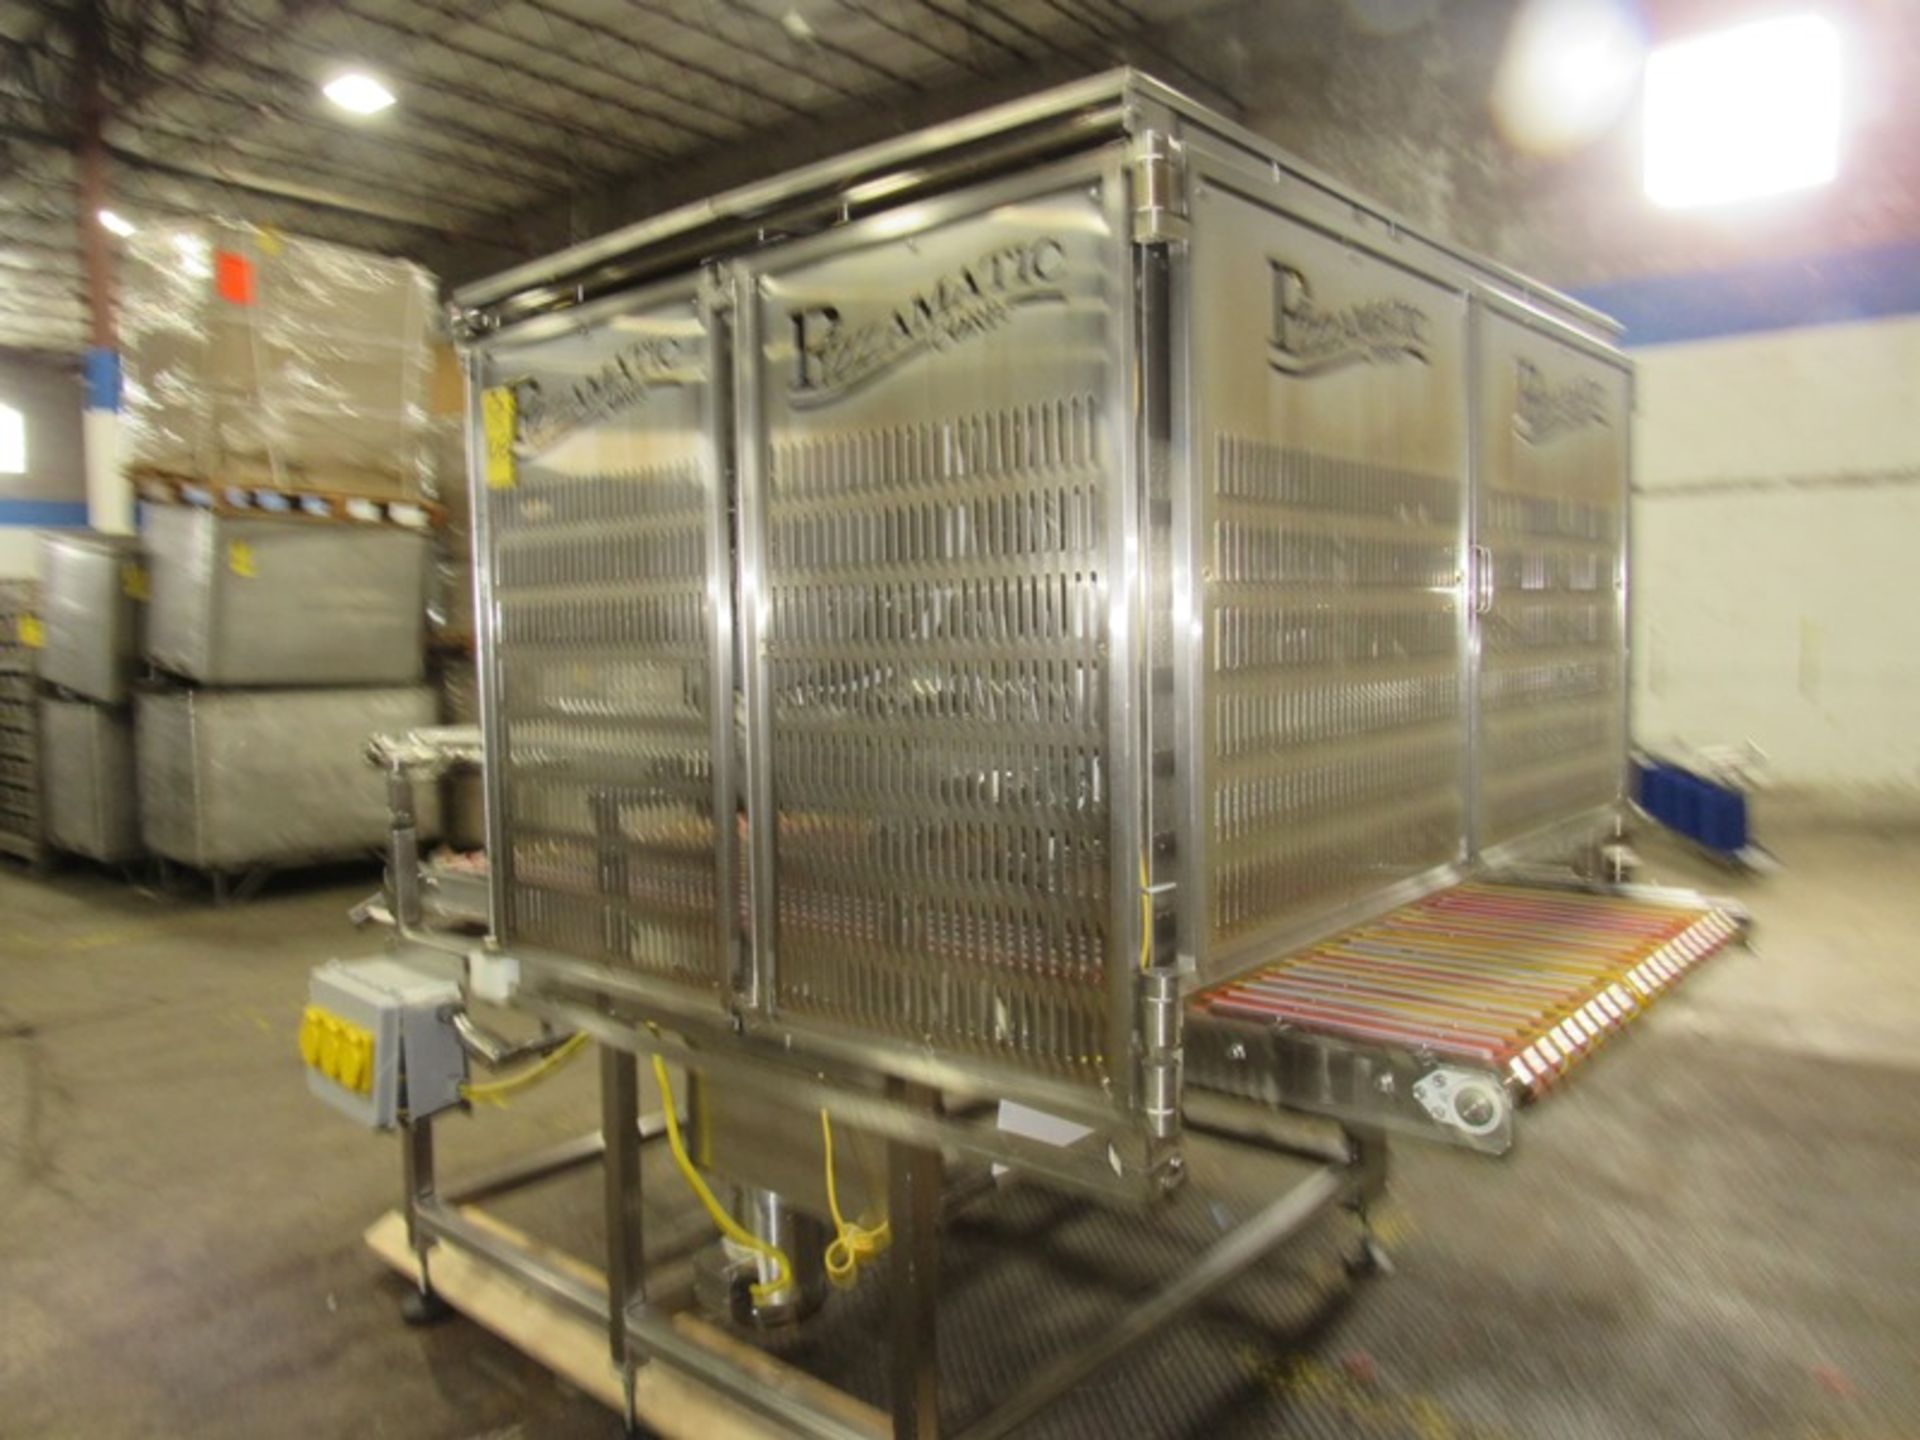 Pizzamatic Corp. Cheese Water Fall, 45" W X 7' L conveyor, 240 volts, 3 phase, Located in Plano, - Image 2 of 9